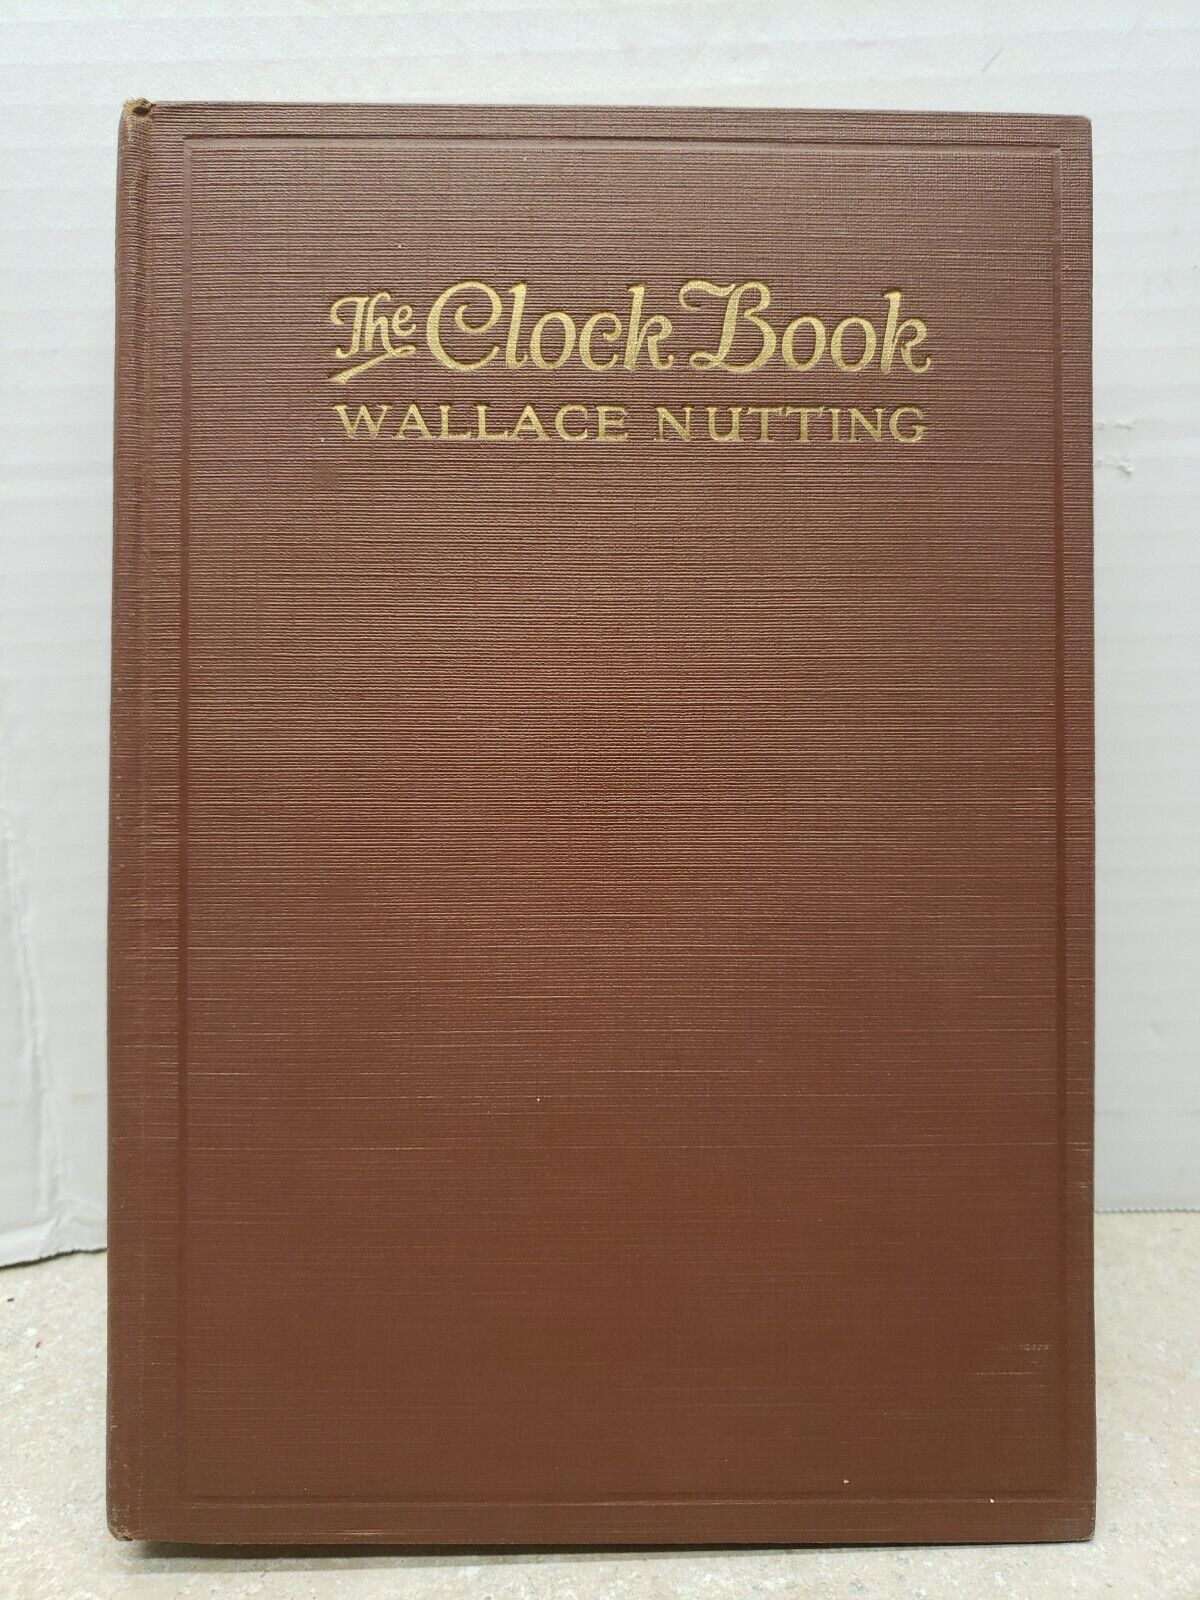 The Clock Book 1924 First Edition by the Famous Wallace Nutting of Art Fame